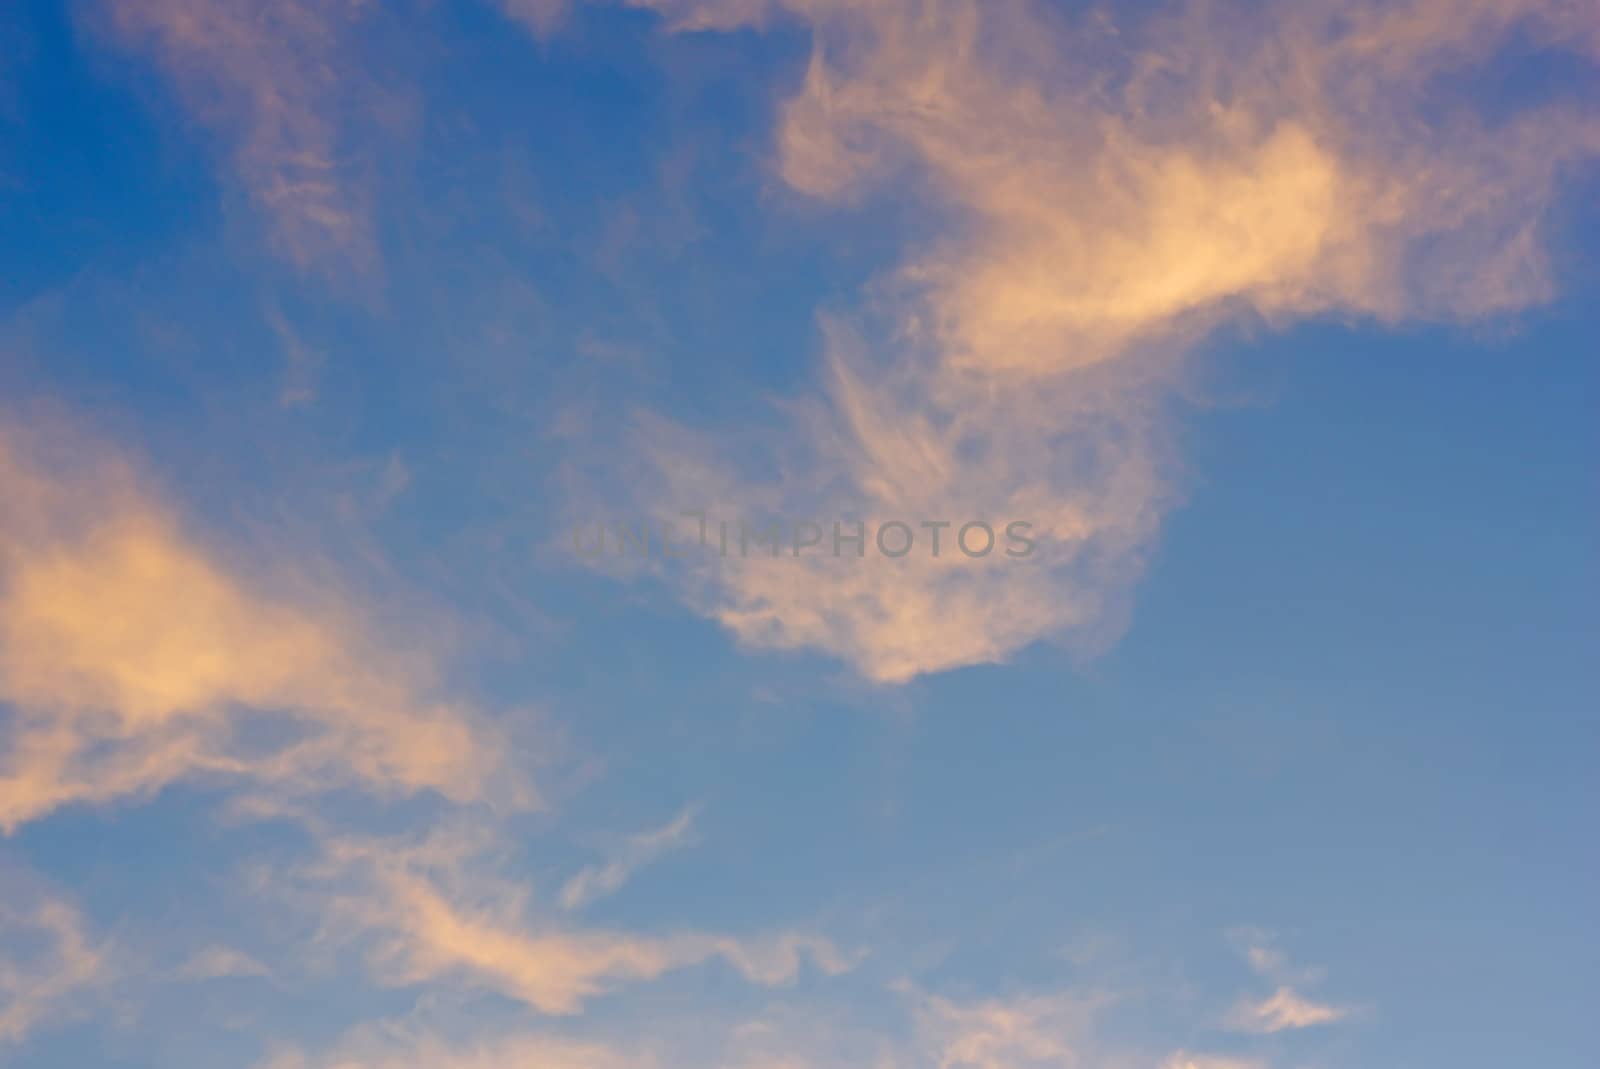 Evening sky with abstract clouds by sergpet